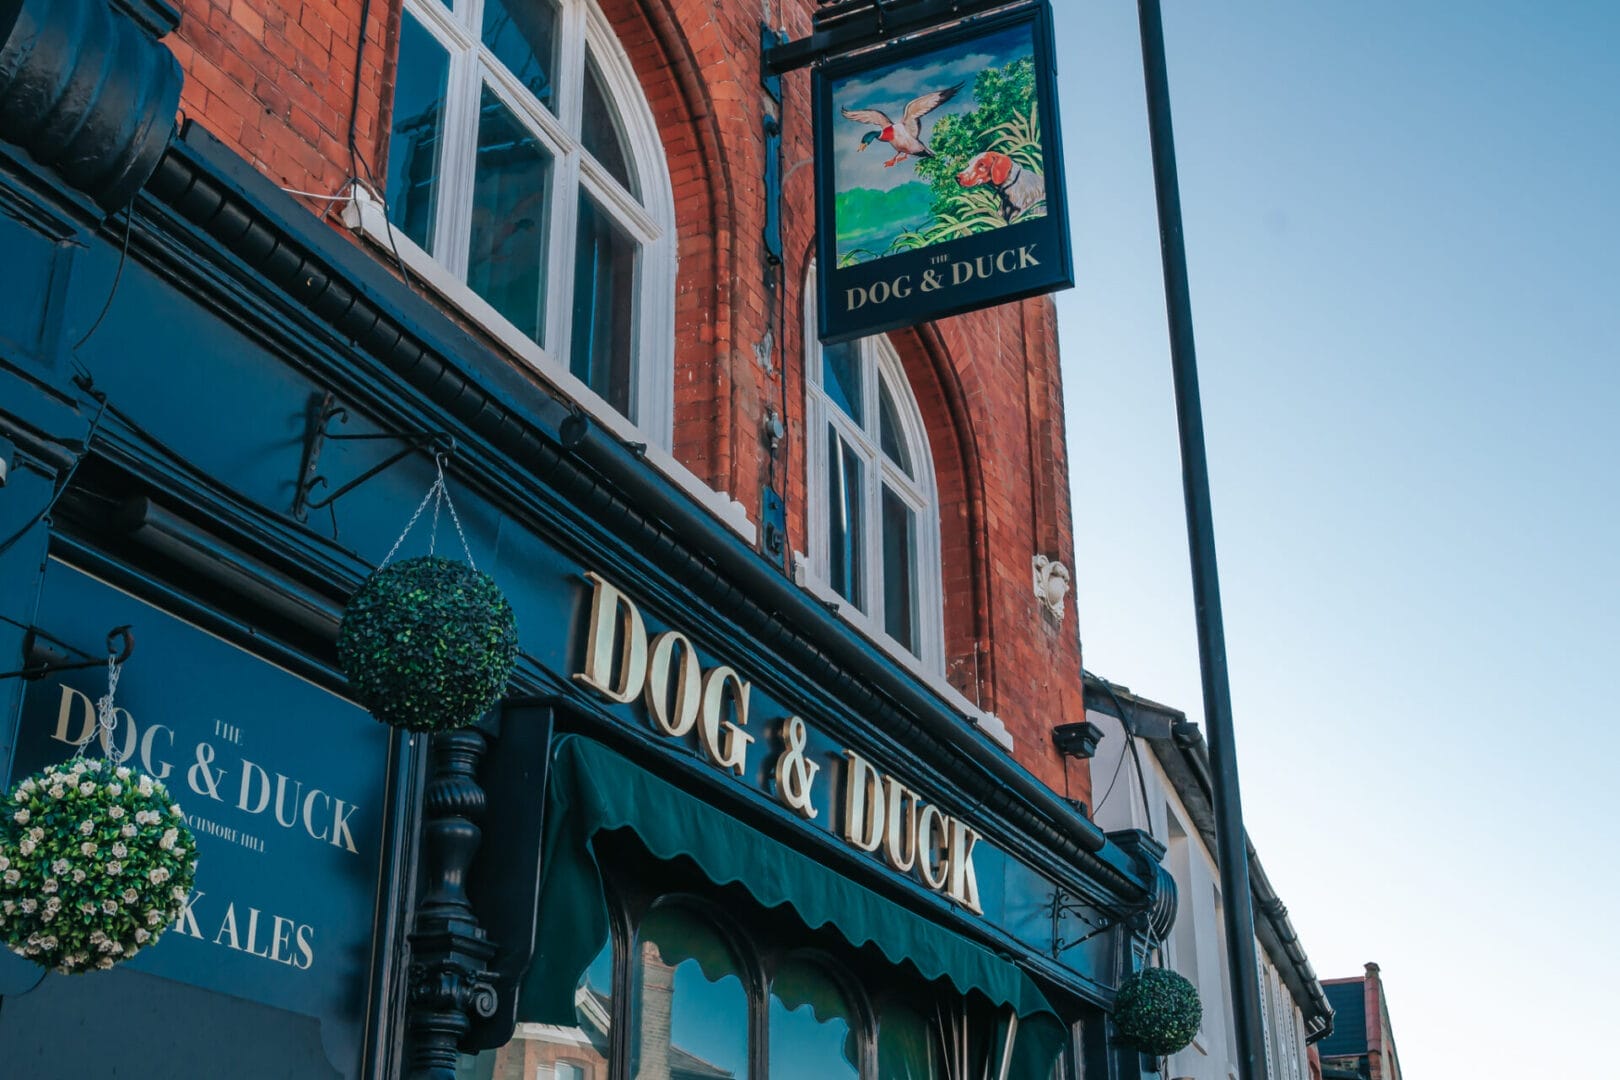 Lease A Pub In London - The Dog & Duck Is Available !